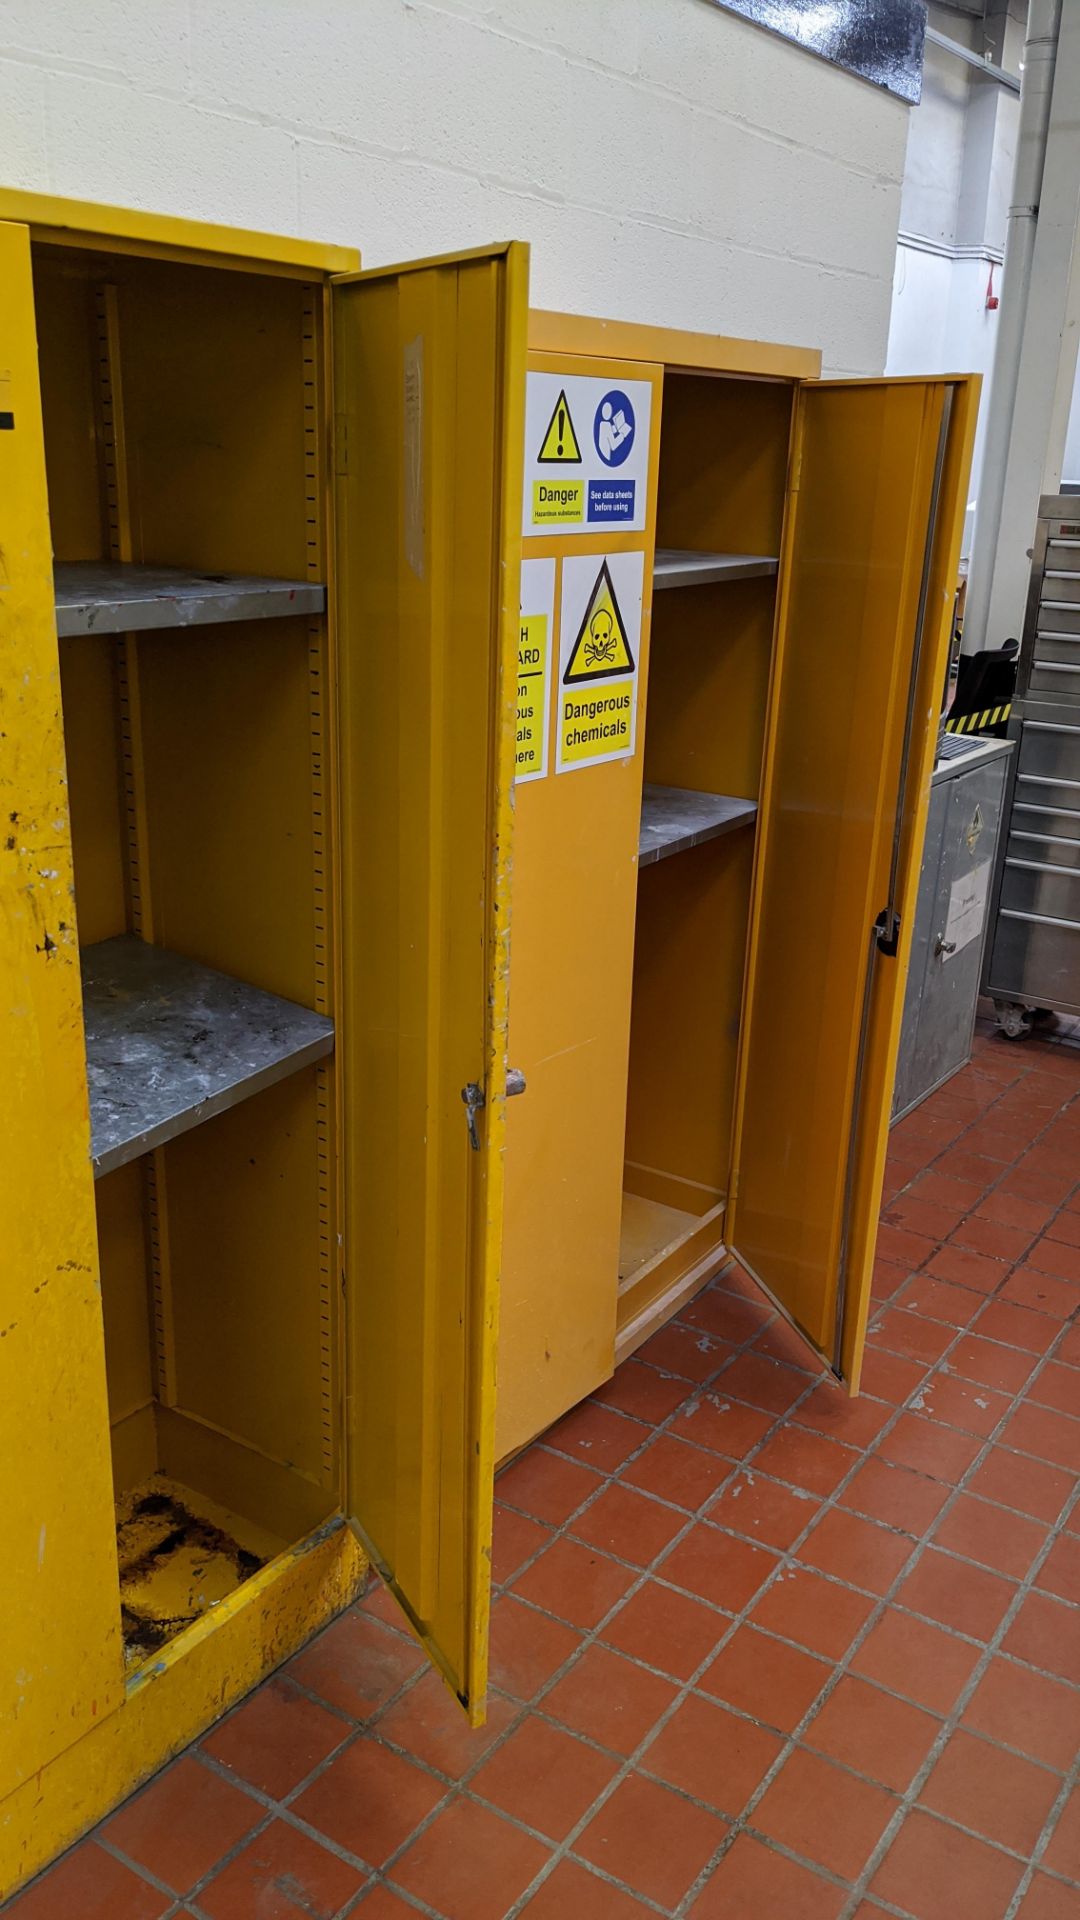 4 off assorted size flammable liquid/chemical cupboards Lots 1 to 39 comprise the total assets - Image 7 of 7